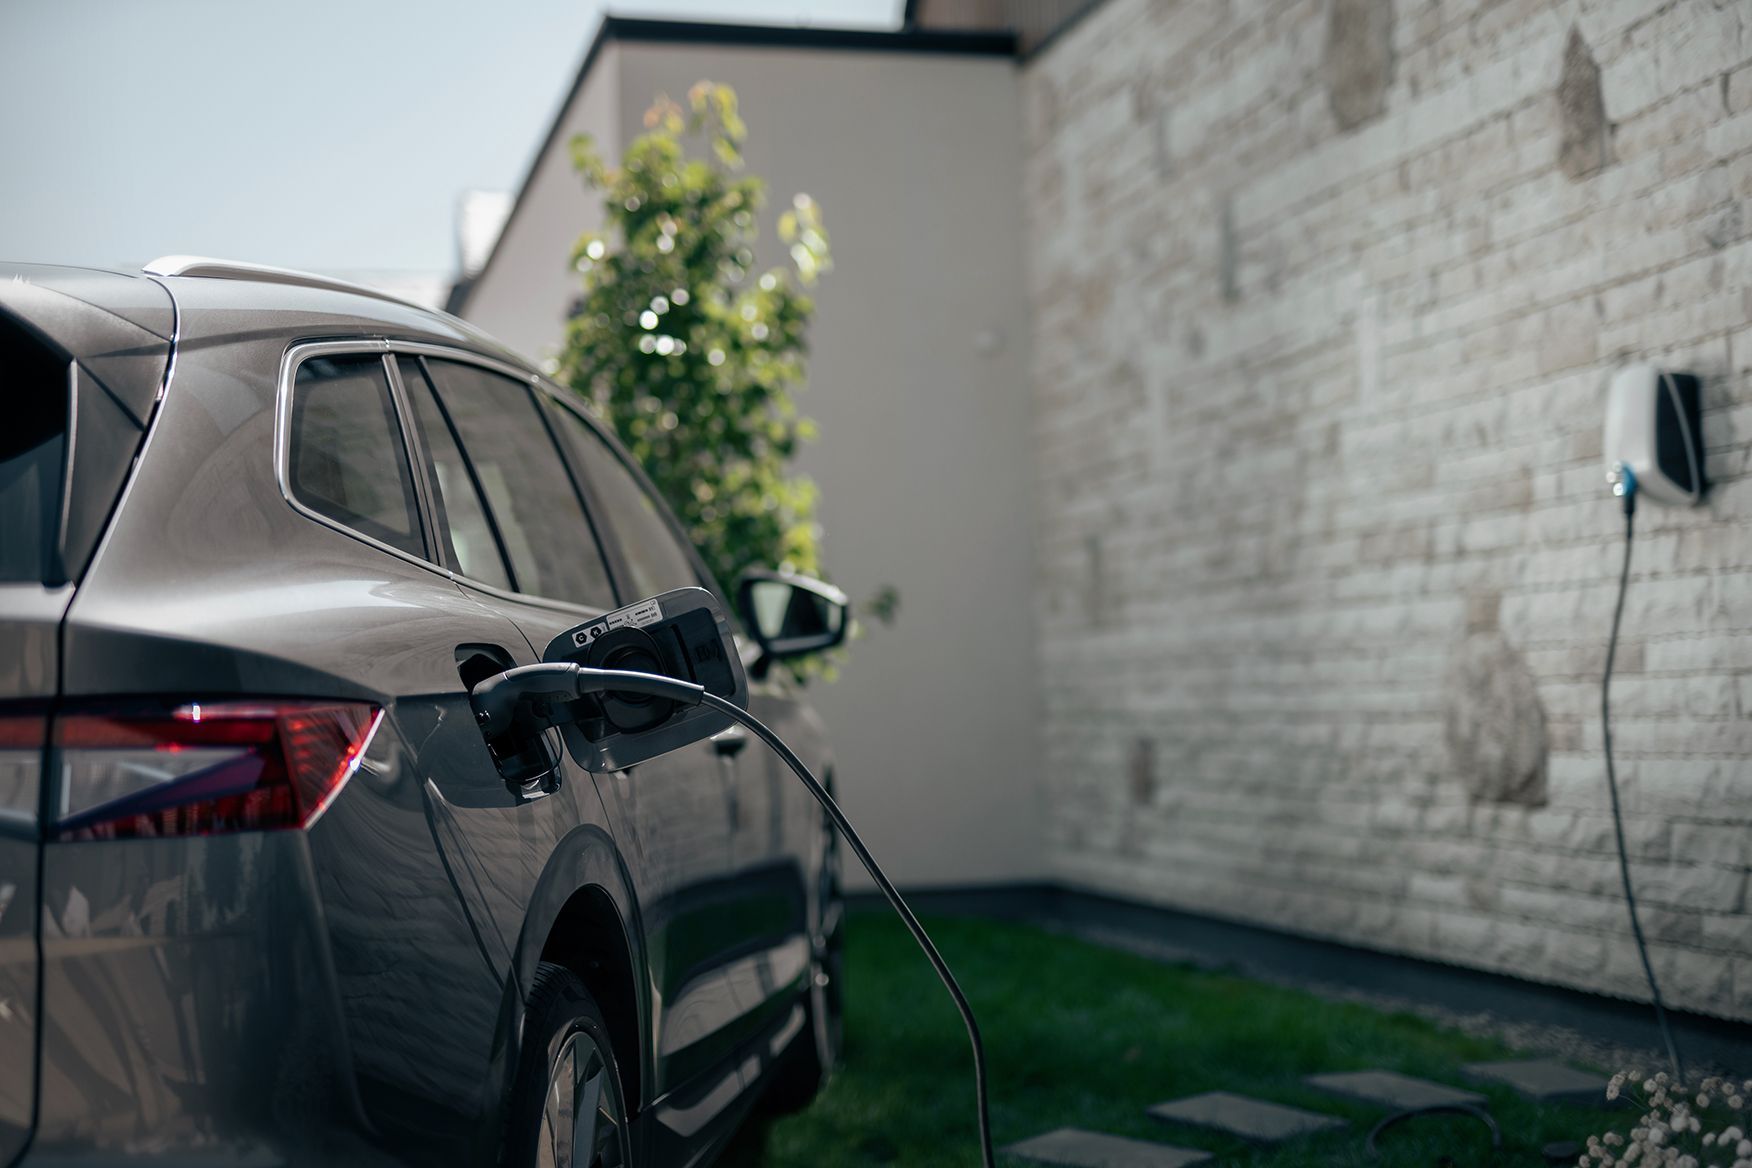 A car is parked outside of the house while it's connected and charging to the EVBox Elvi charging station placed on the house's brick wall.